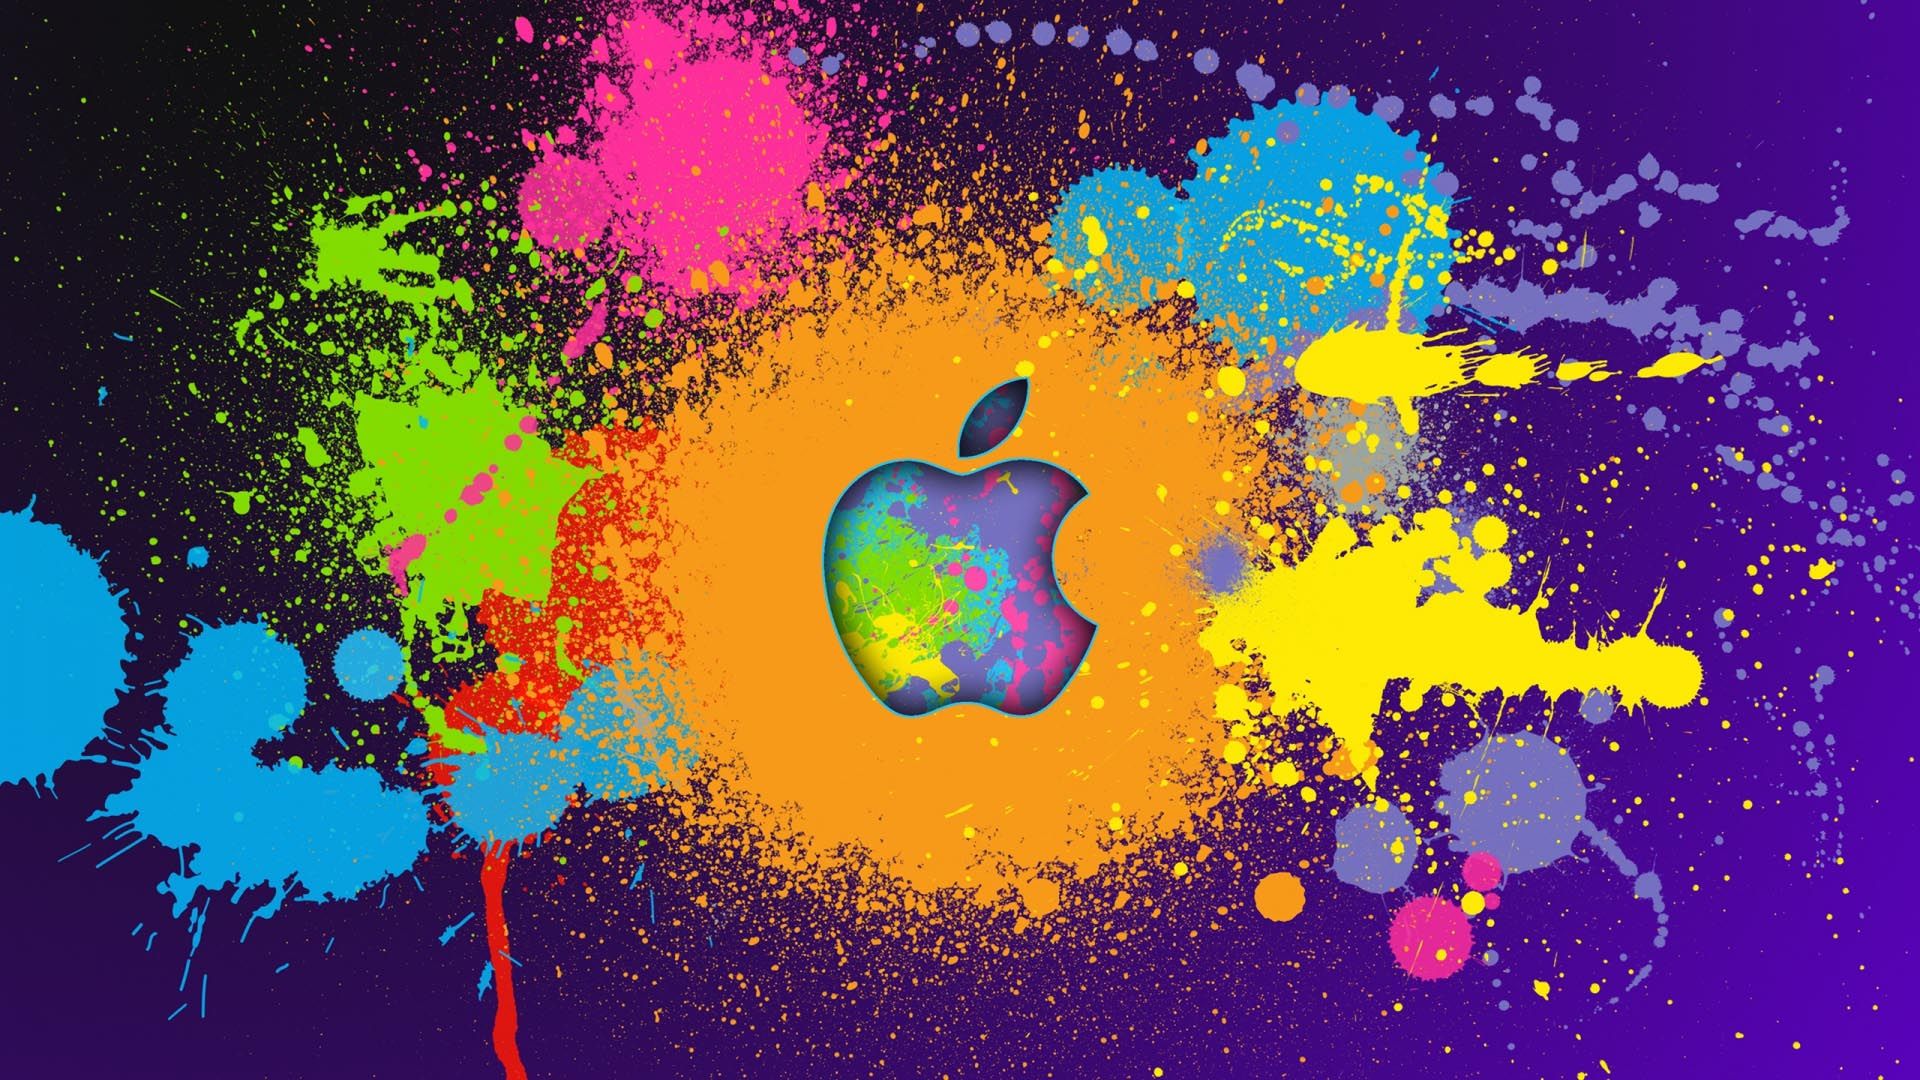 Awesome apple wallpapers